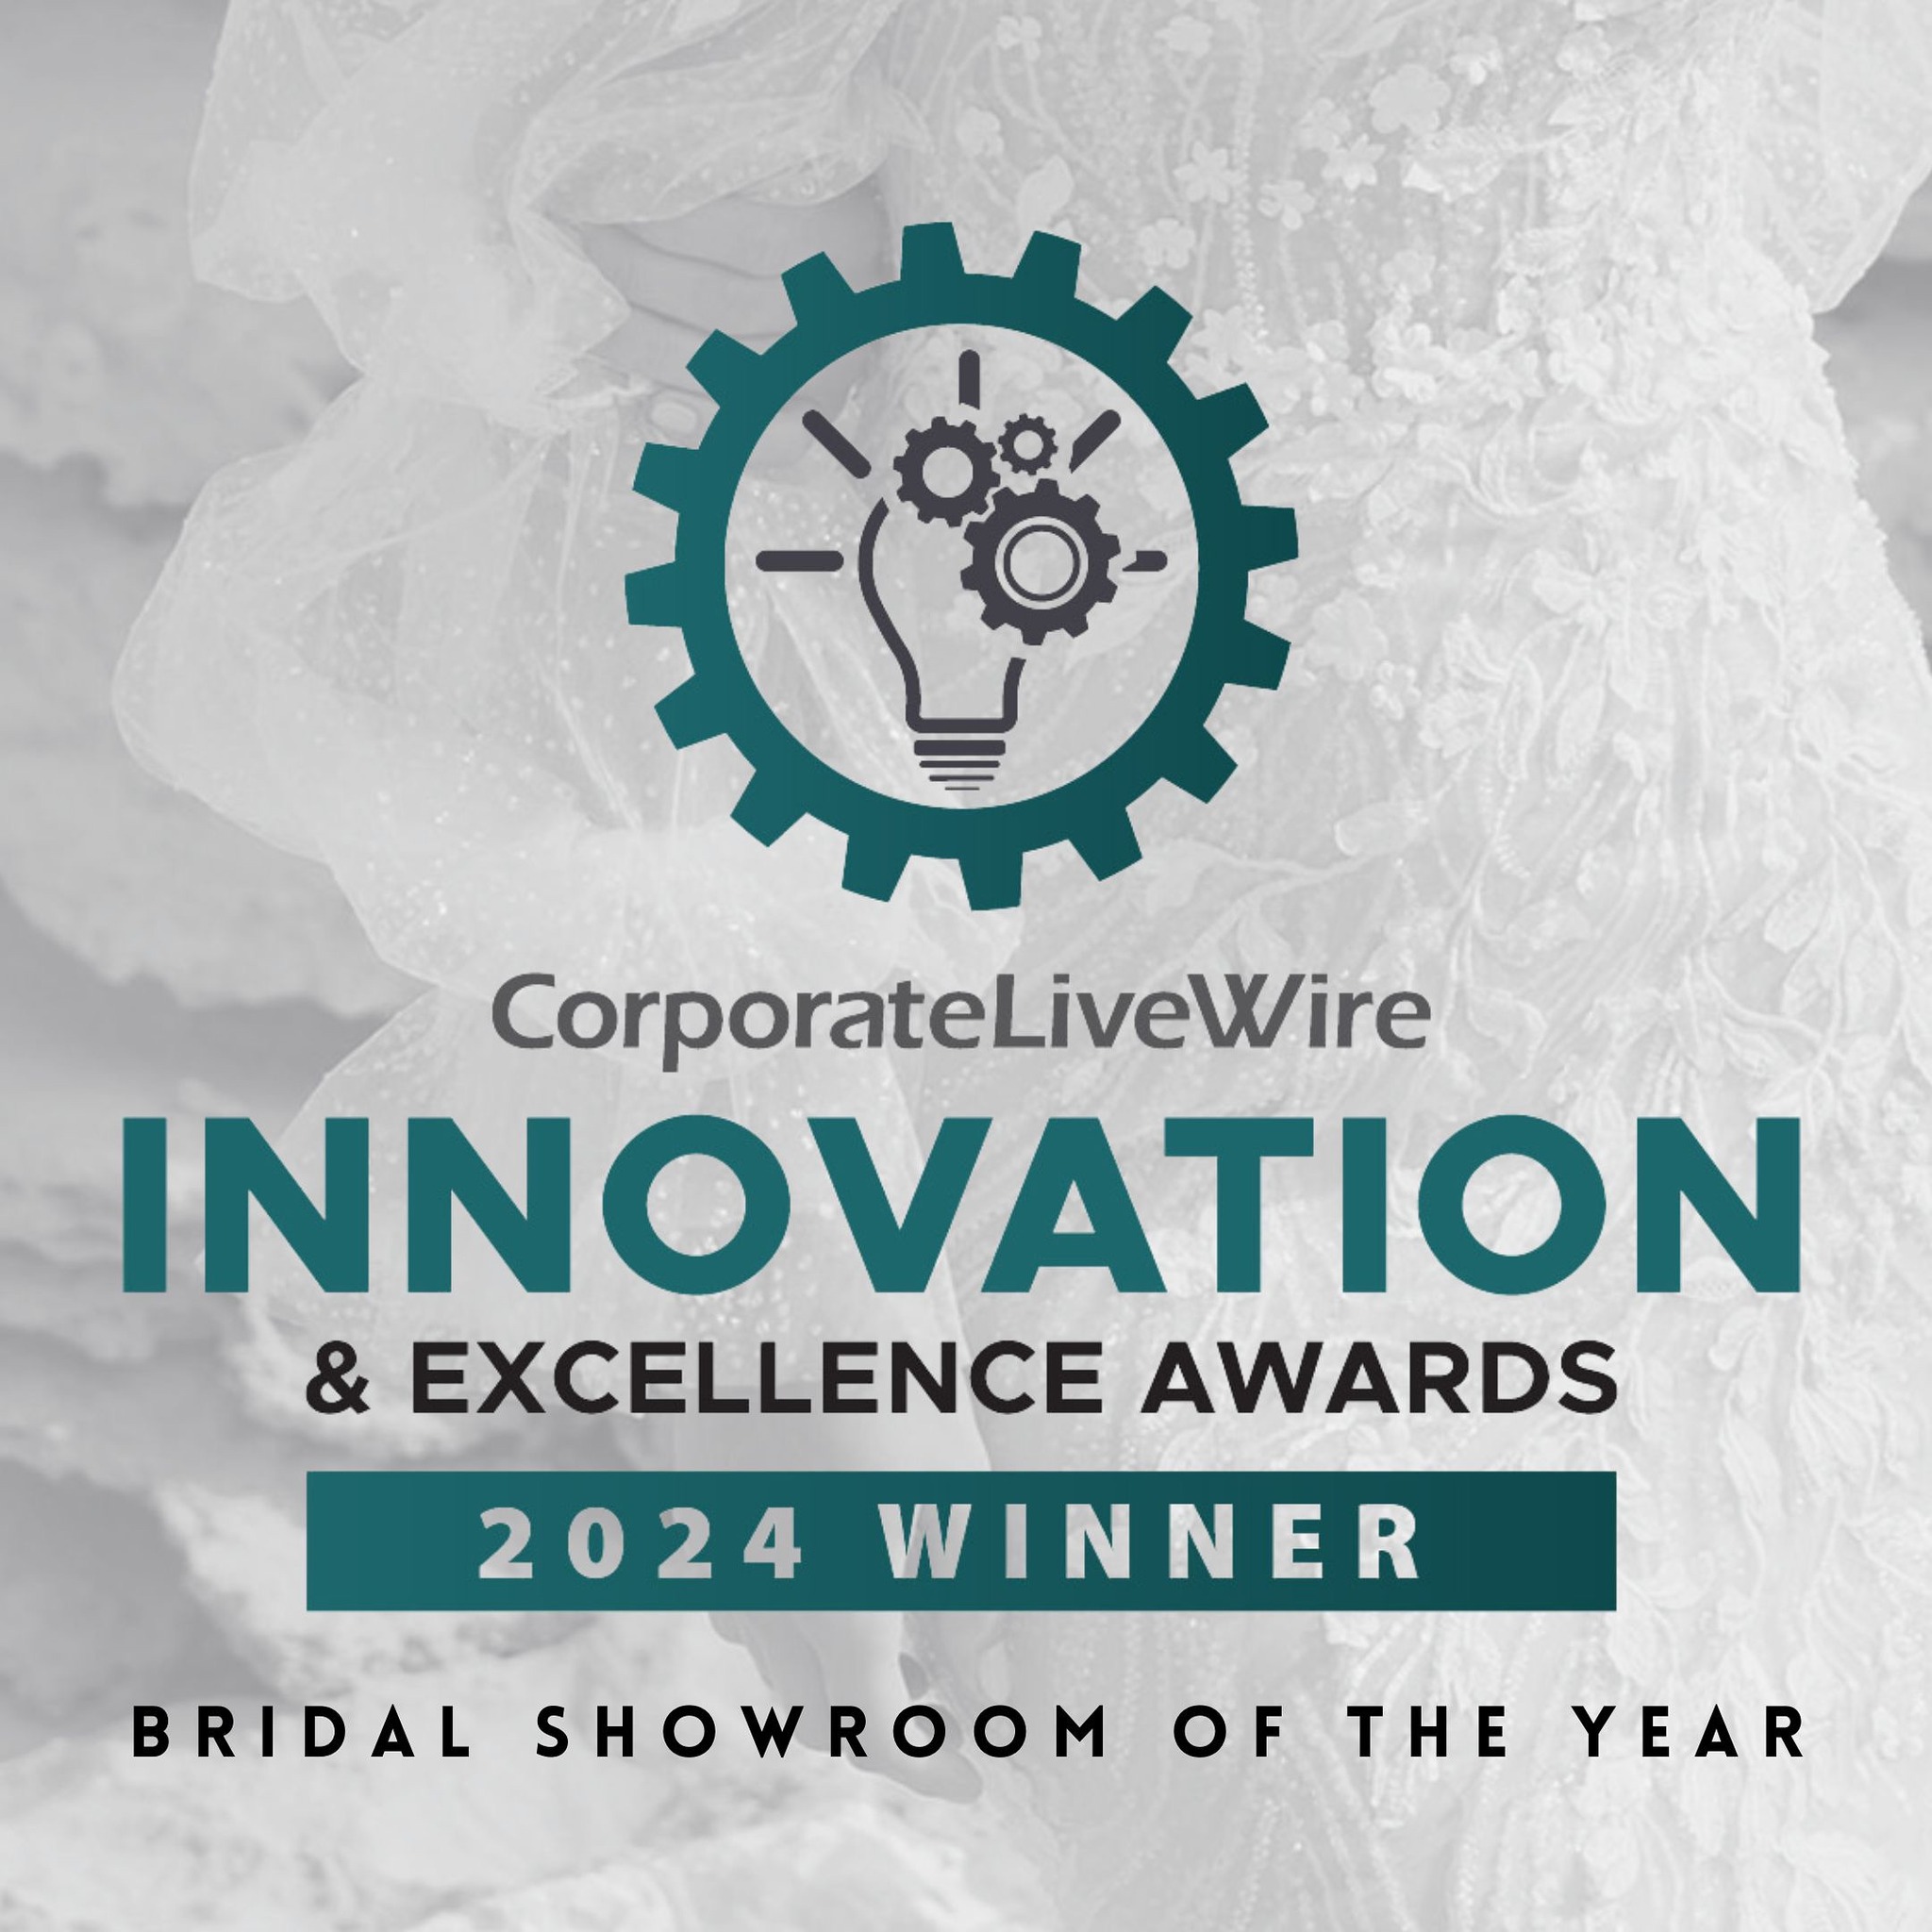 WINNERS - Absolutely blown away for this news to land in our inbox this morning - We’ve WON 'Bridal Showroom Of The Year' with the Corporate Livewire In Innovation & Excellence Awards for 2024 ◊As you all know our dreamteam are so dedicated to going above & beyond in making your experience with us across our stores - @yapbridal @sistersofgracebridal & @loveabove_curvebridal so perfect & magical … the recognition with this award has made the start of 2024 even more incredible ◊Thank you always for your love & support our precious ones - without you we wouldn’t be able to live our dream bridal stylist life #preciousnewera ◊#bridalstylists #weddingaward #corporatelivewirewinner #winners #bridalawards #bridalshowroomoftheyear #winners2024 #youarepreciousbridal #loveabovecurvebridallounge #bestmorning #amazingnews #newcastleupontyne